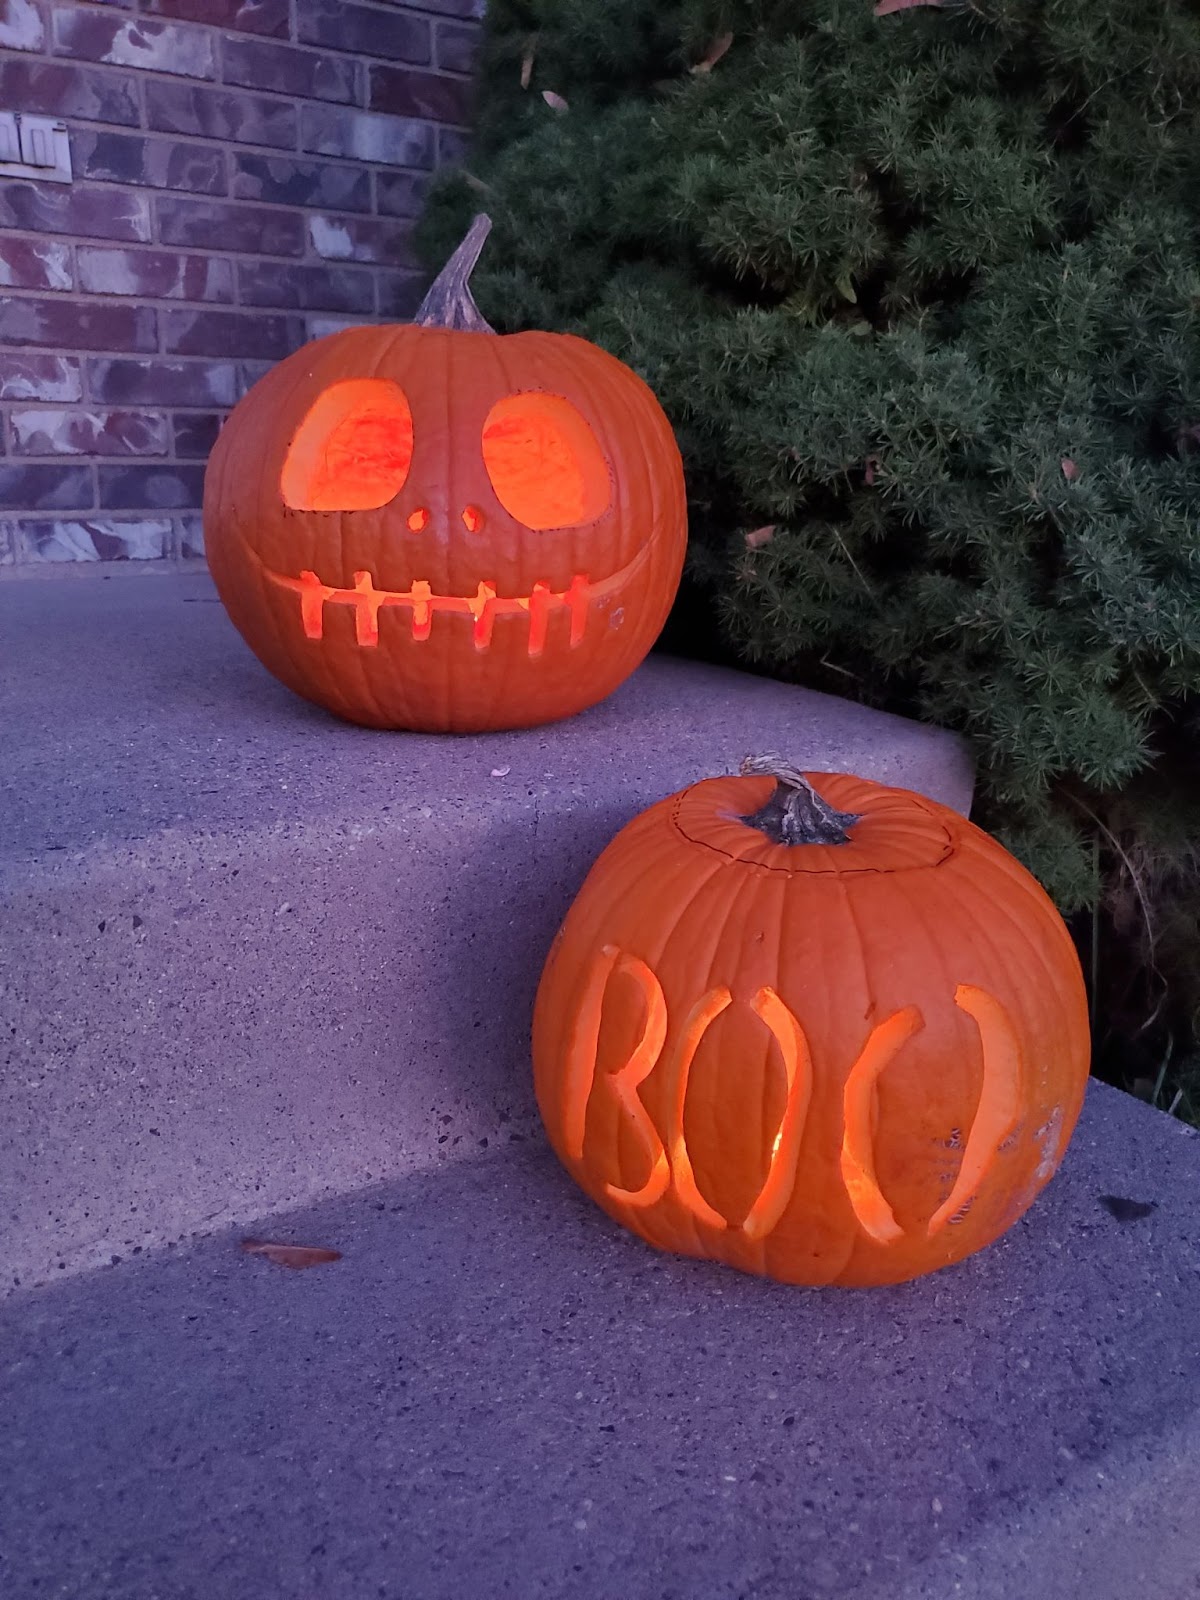 Two jack-o-lanterns on a set of concrete steps to a front porch. One is Jack Skellington and the other is carved to say “Boo”